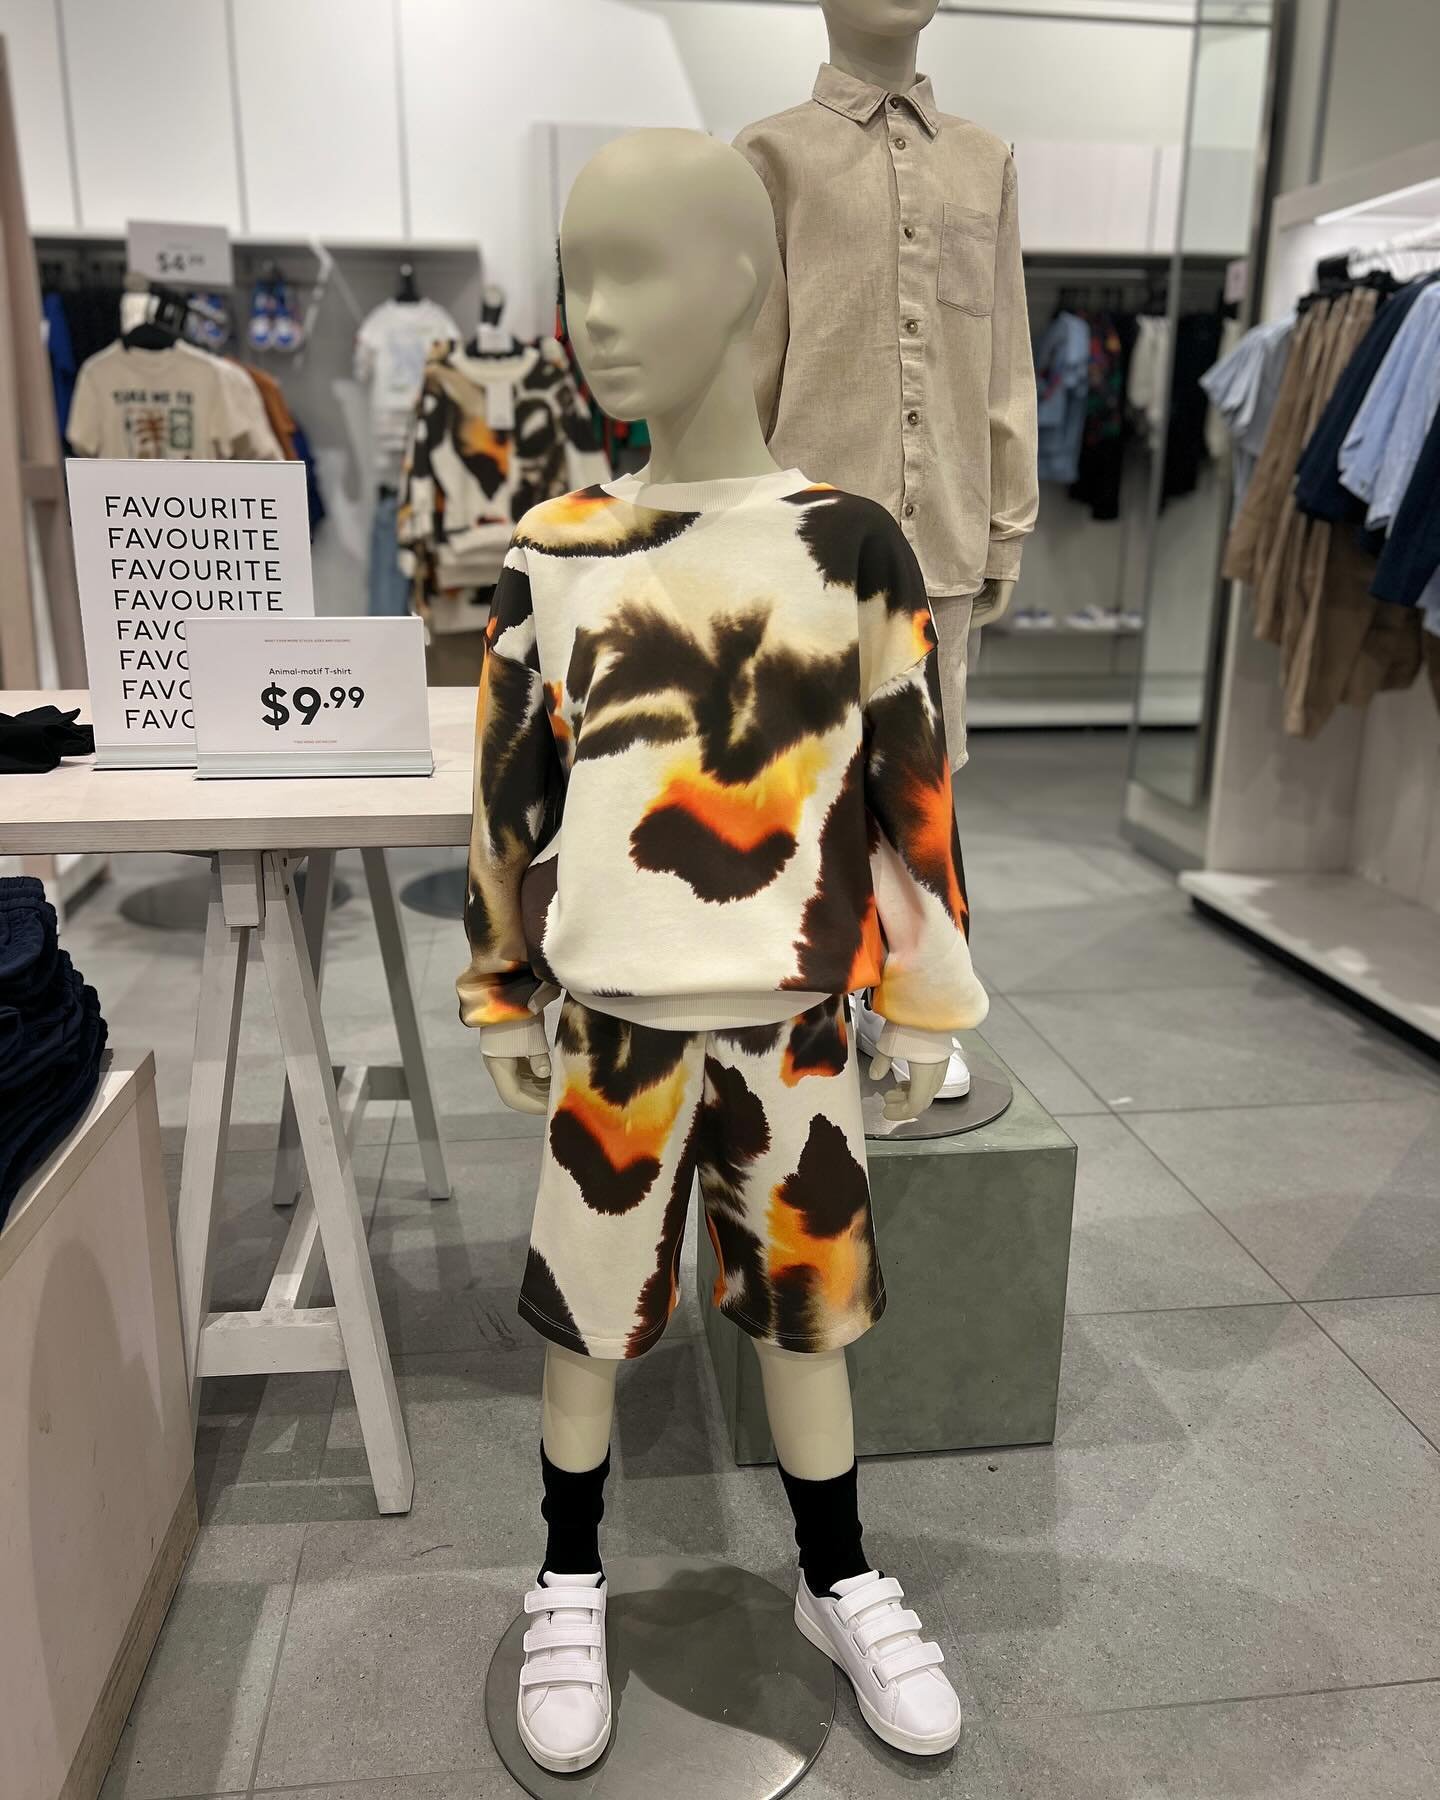 Style the kiddos in works of art by @ropvanmierlo 🦒🐻🦌 Shop this wild collection at @hm_kids upstairs at La Palmera.